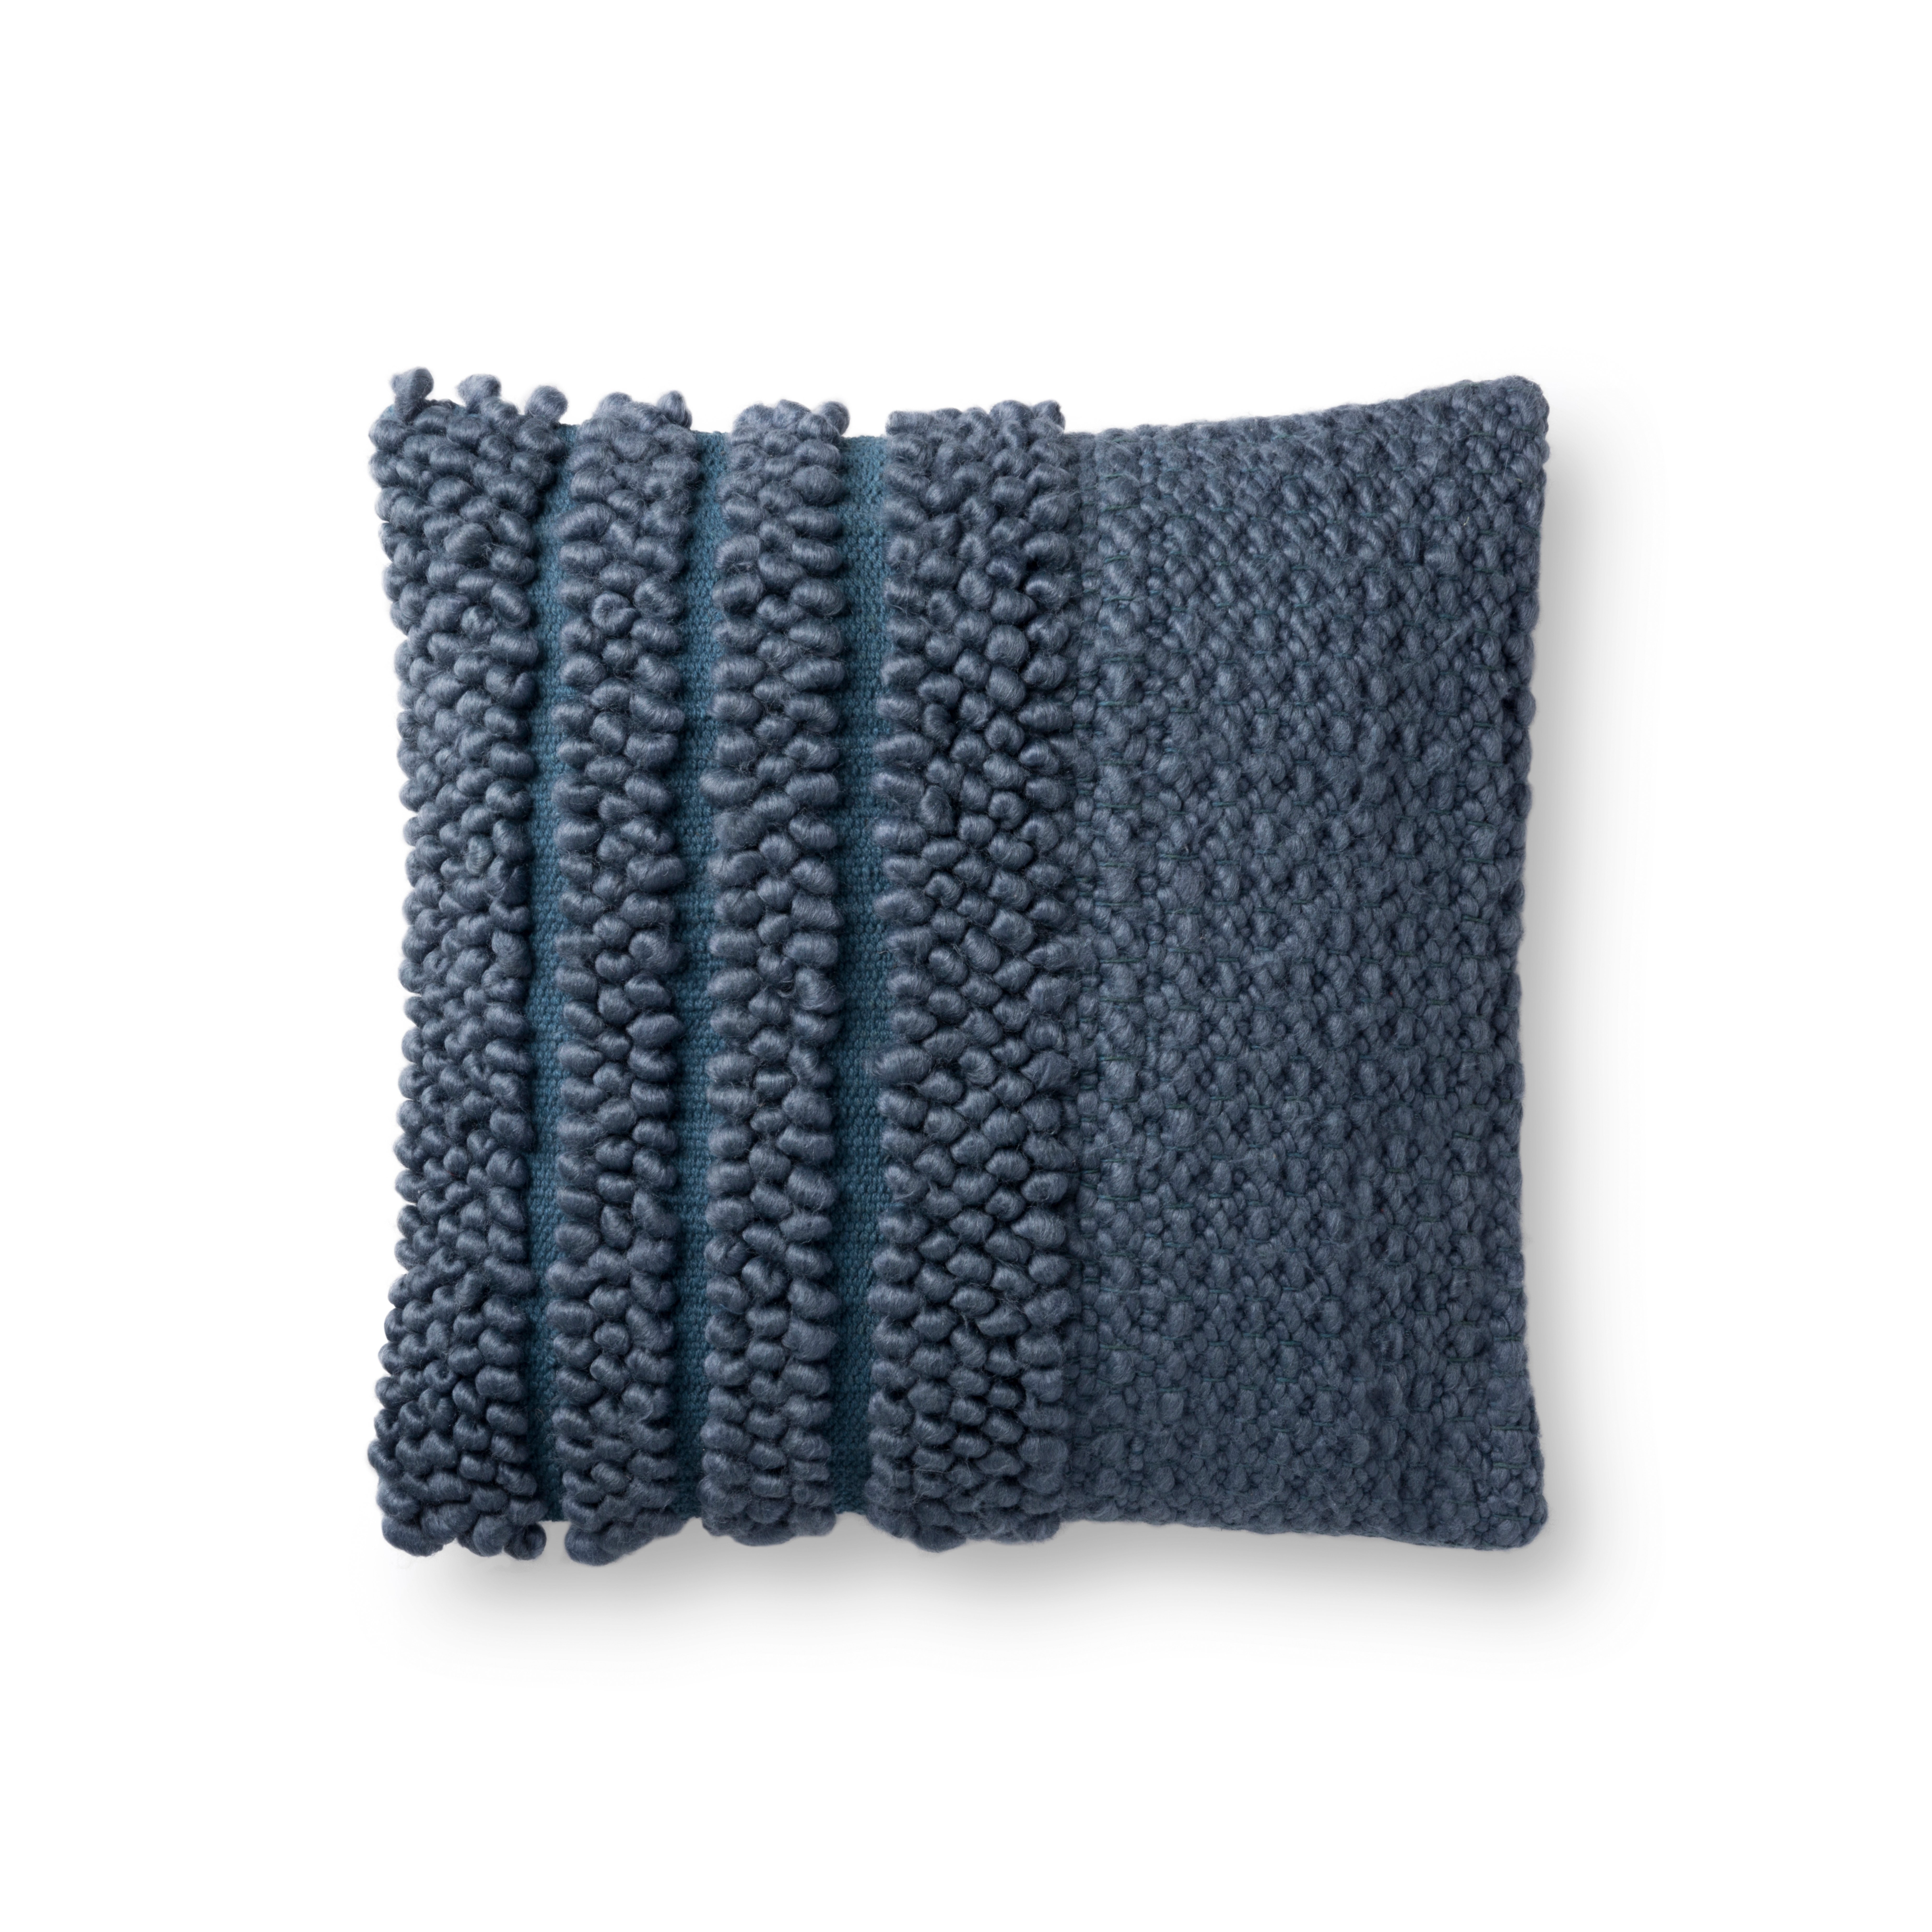 Magnolia Home by Joanna Gaines PILLOWS P1104 NAVY 18" x 18" Cover w/Down - Magnolia Home by Joana Gaines Crafted by Loloi Rugs